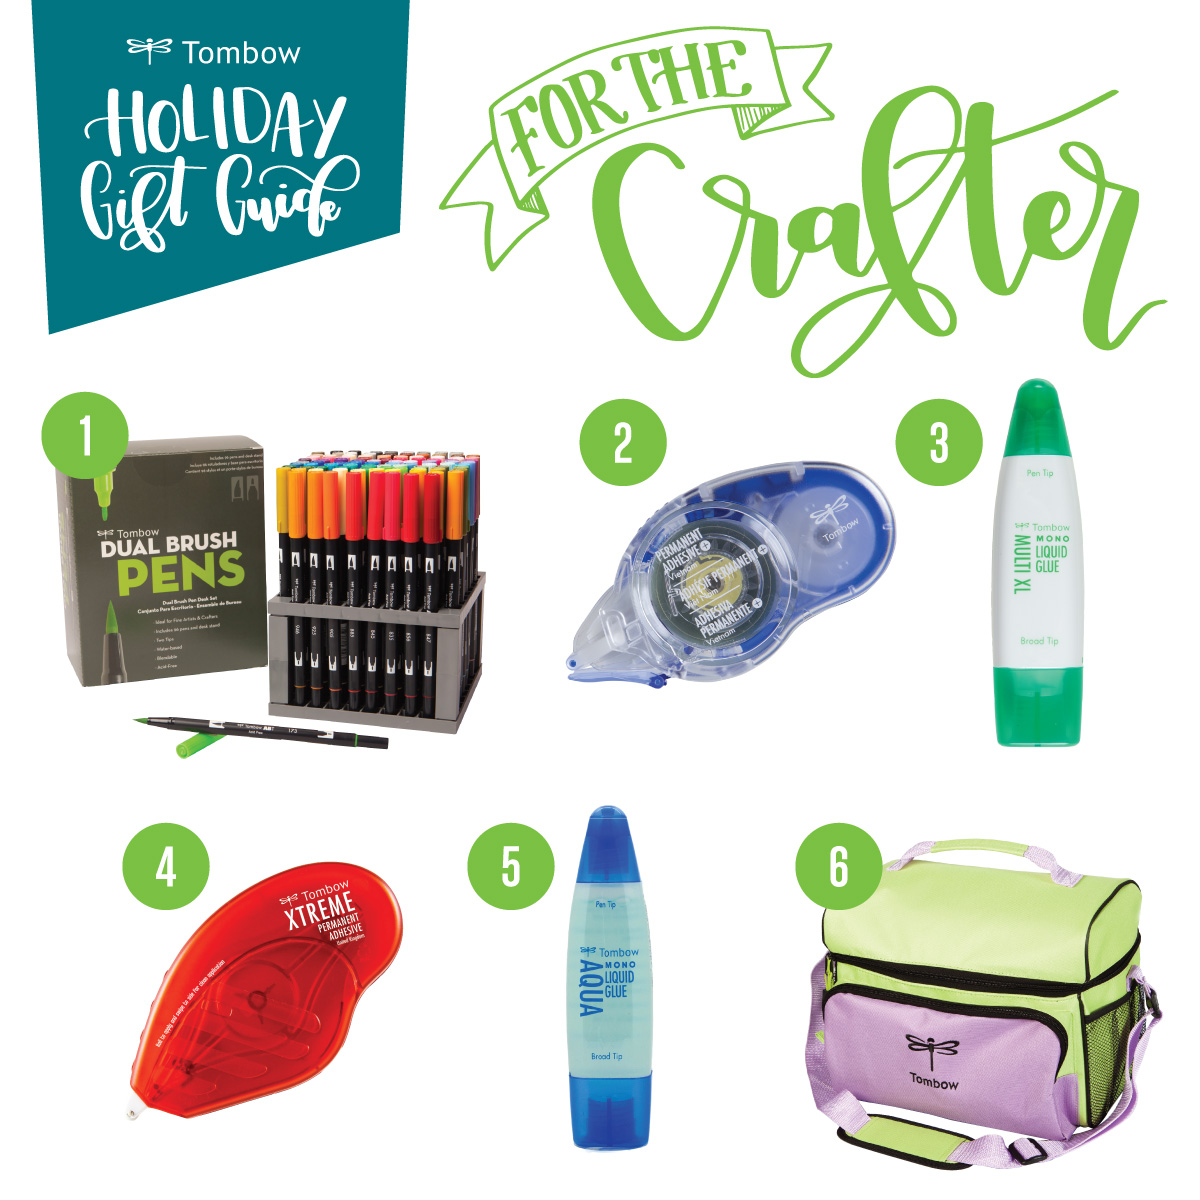 Crafting gifts from Tombow | Tombow Holiday Gift Guide | The best gifts for crafters from @tombowusa